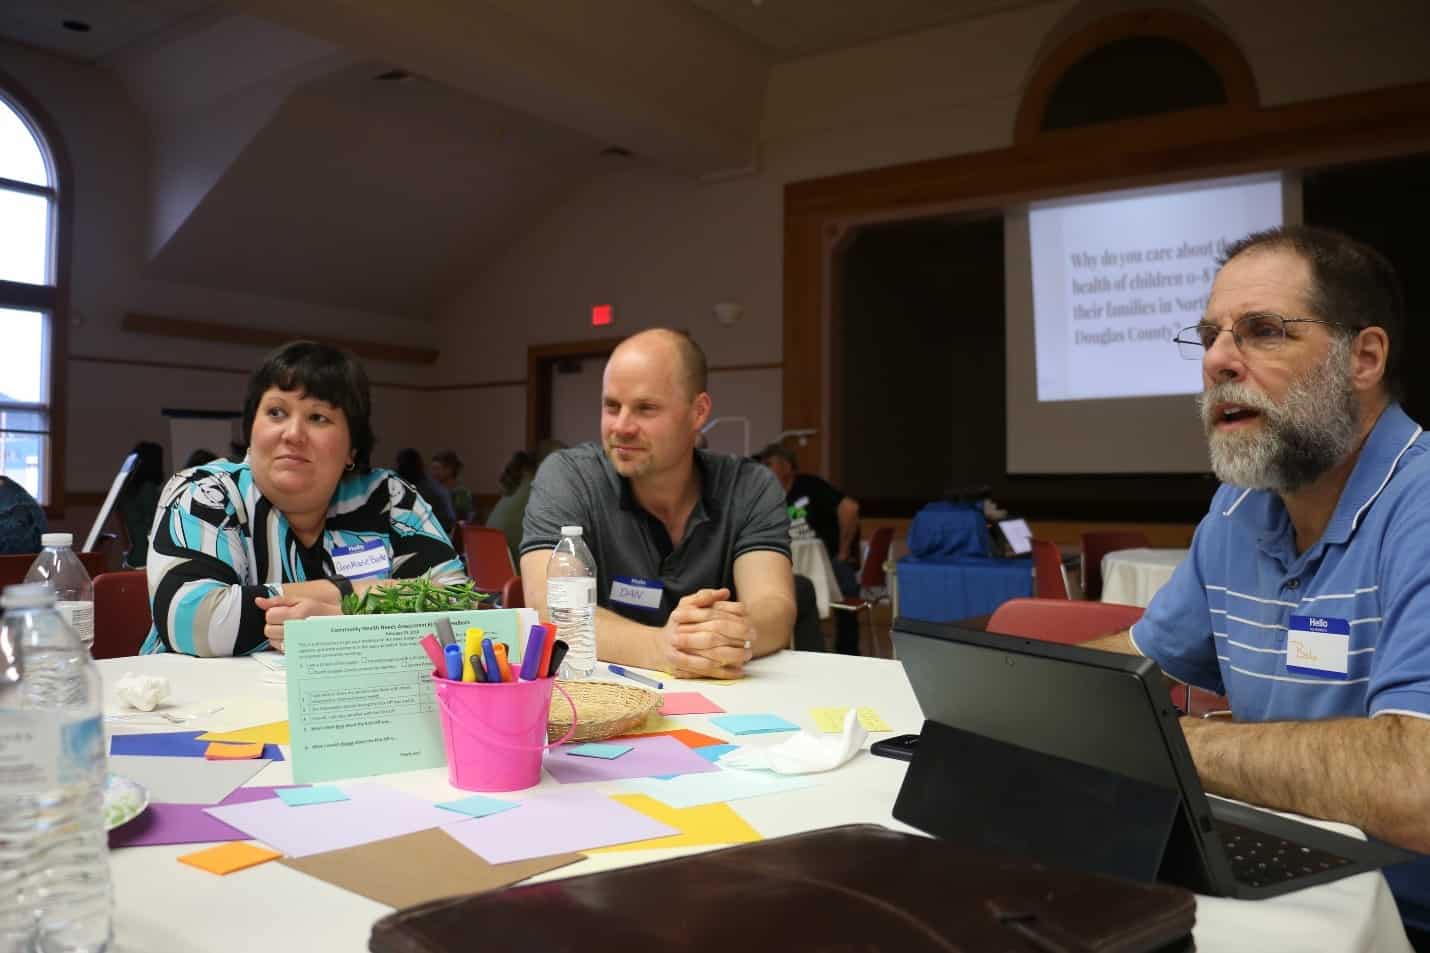 Three rural communities come together to create a vision for health